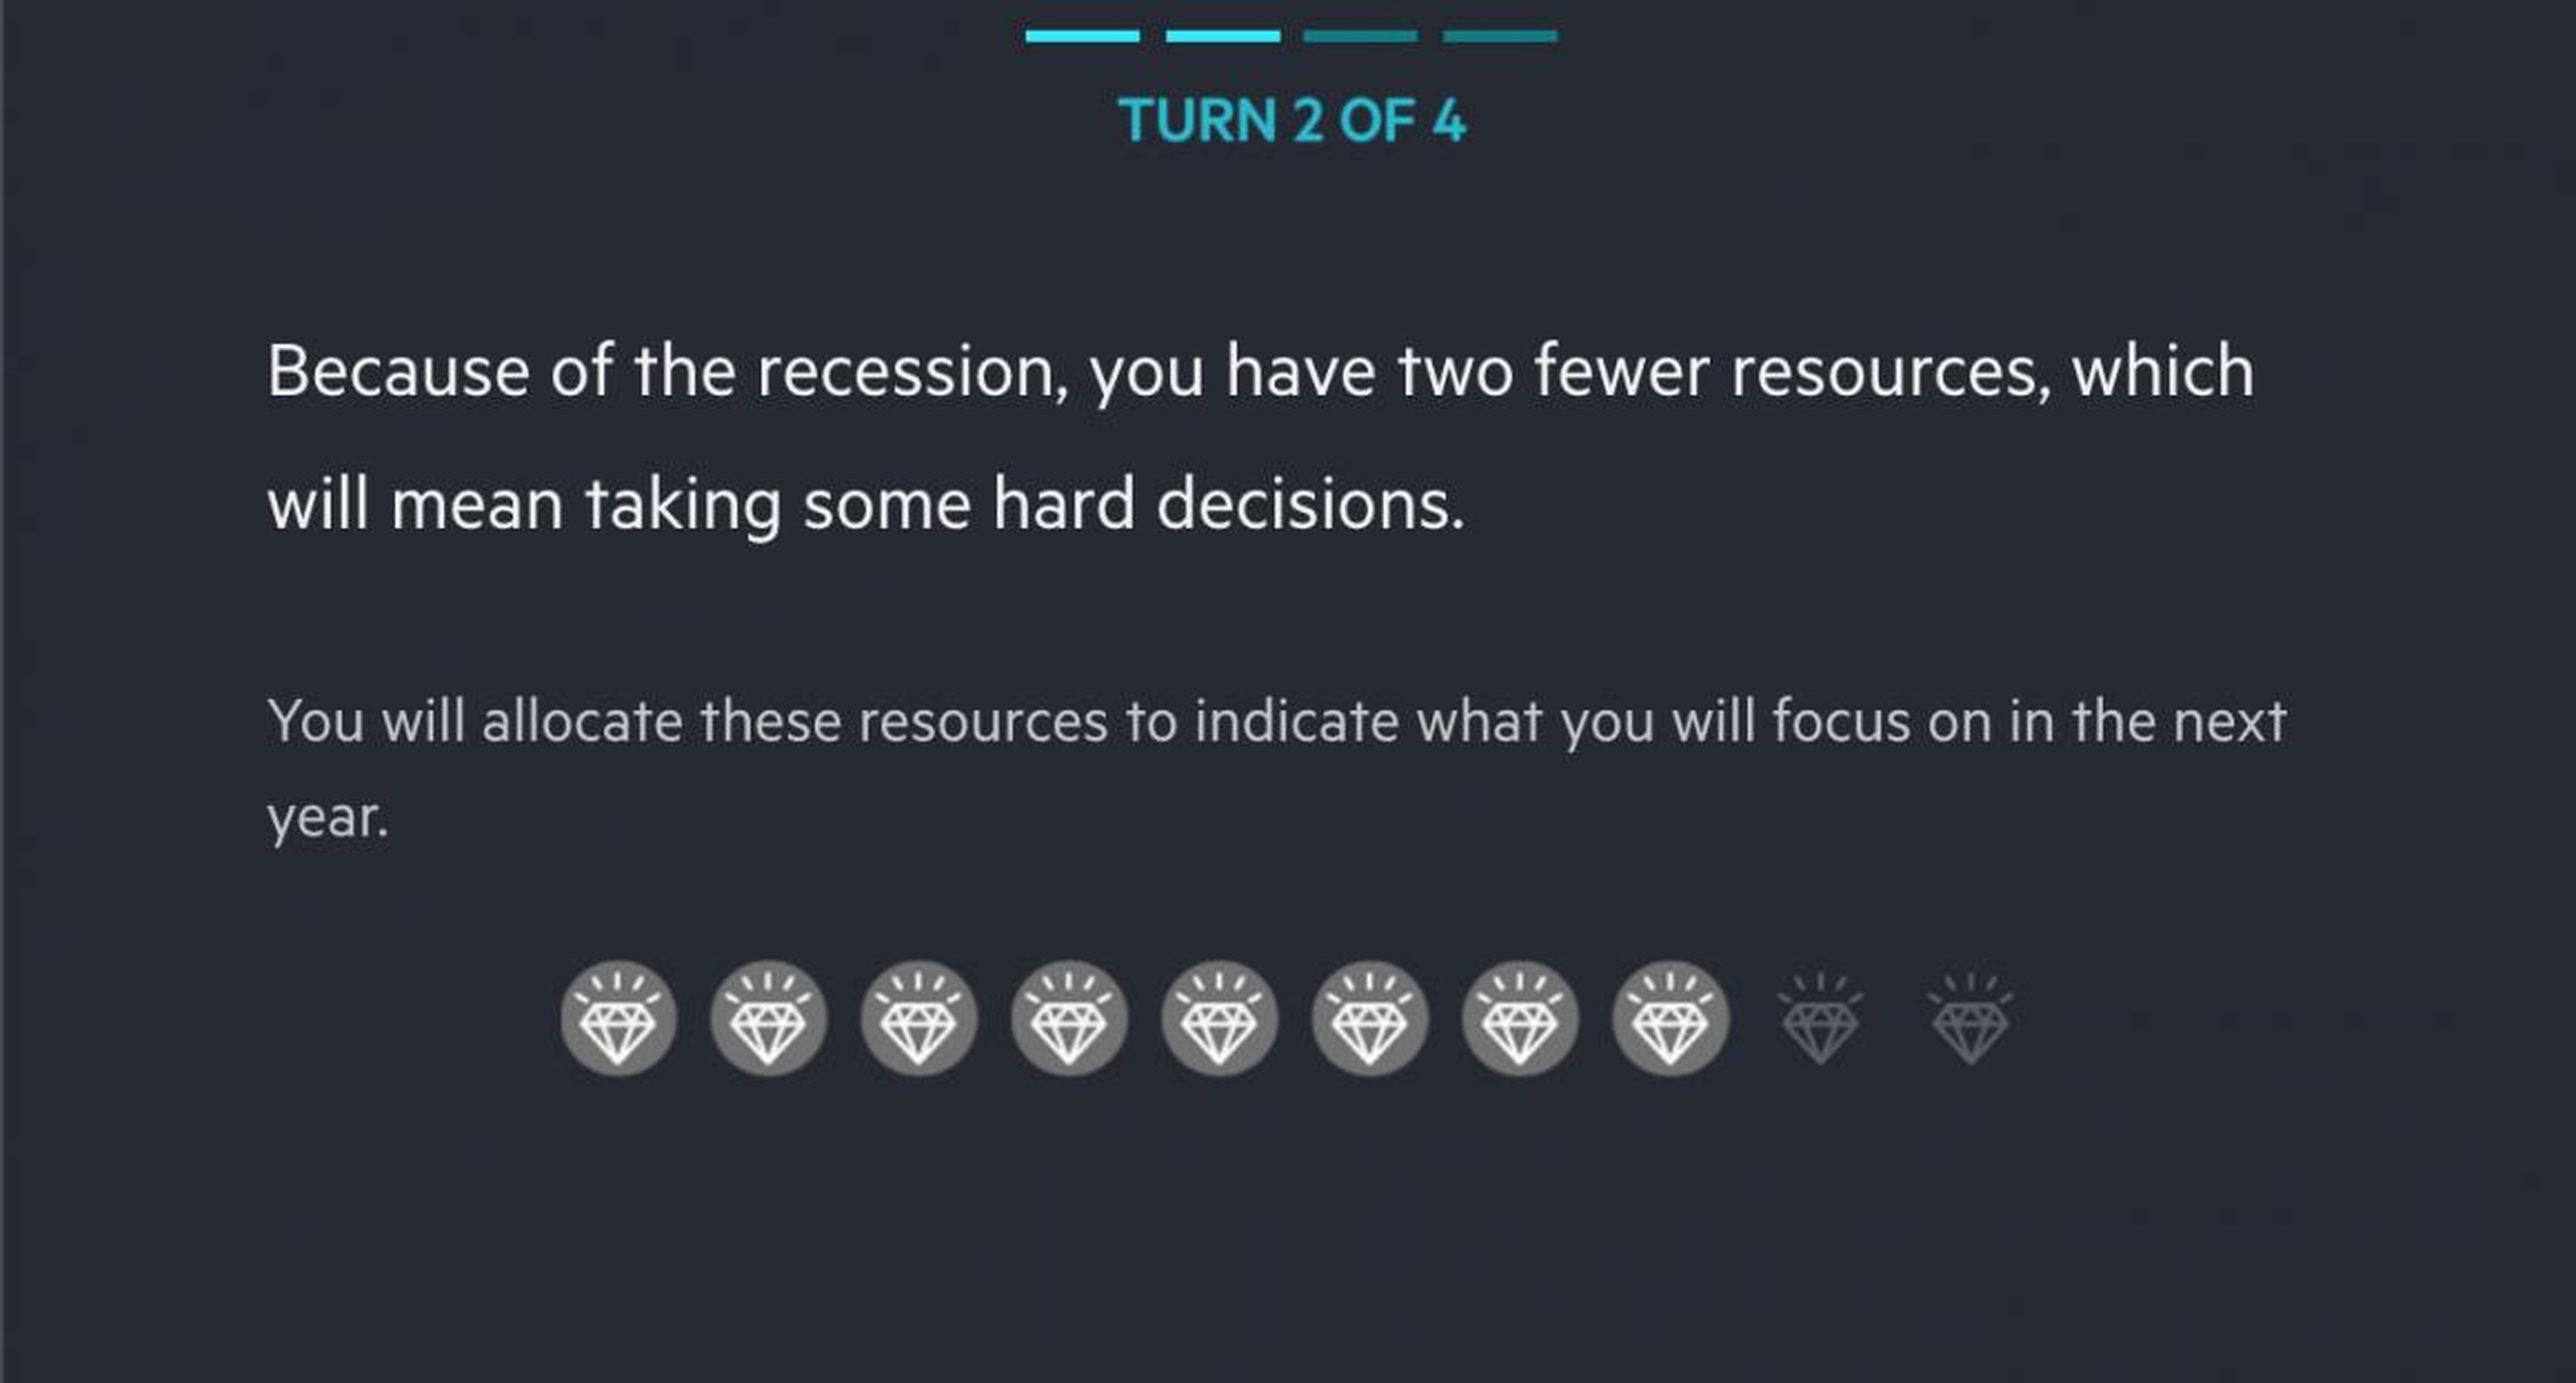 This year I only have 8 resources, so I gave 2 to each sector.